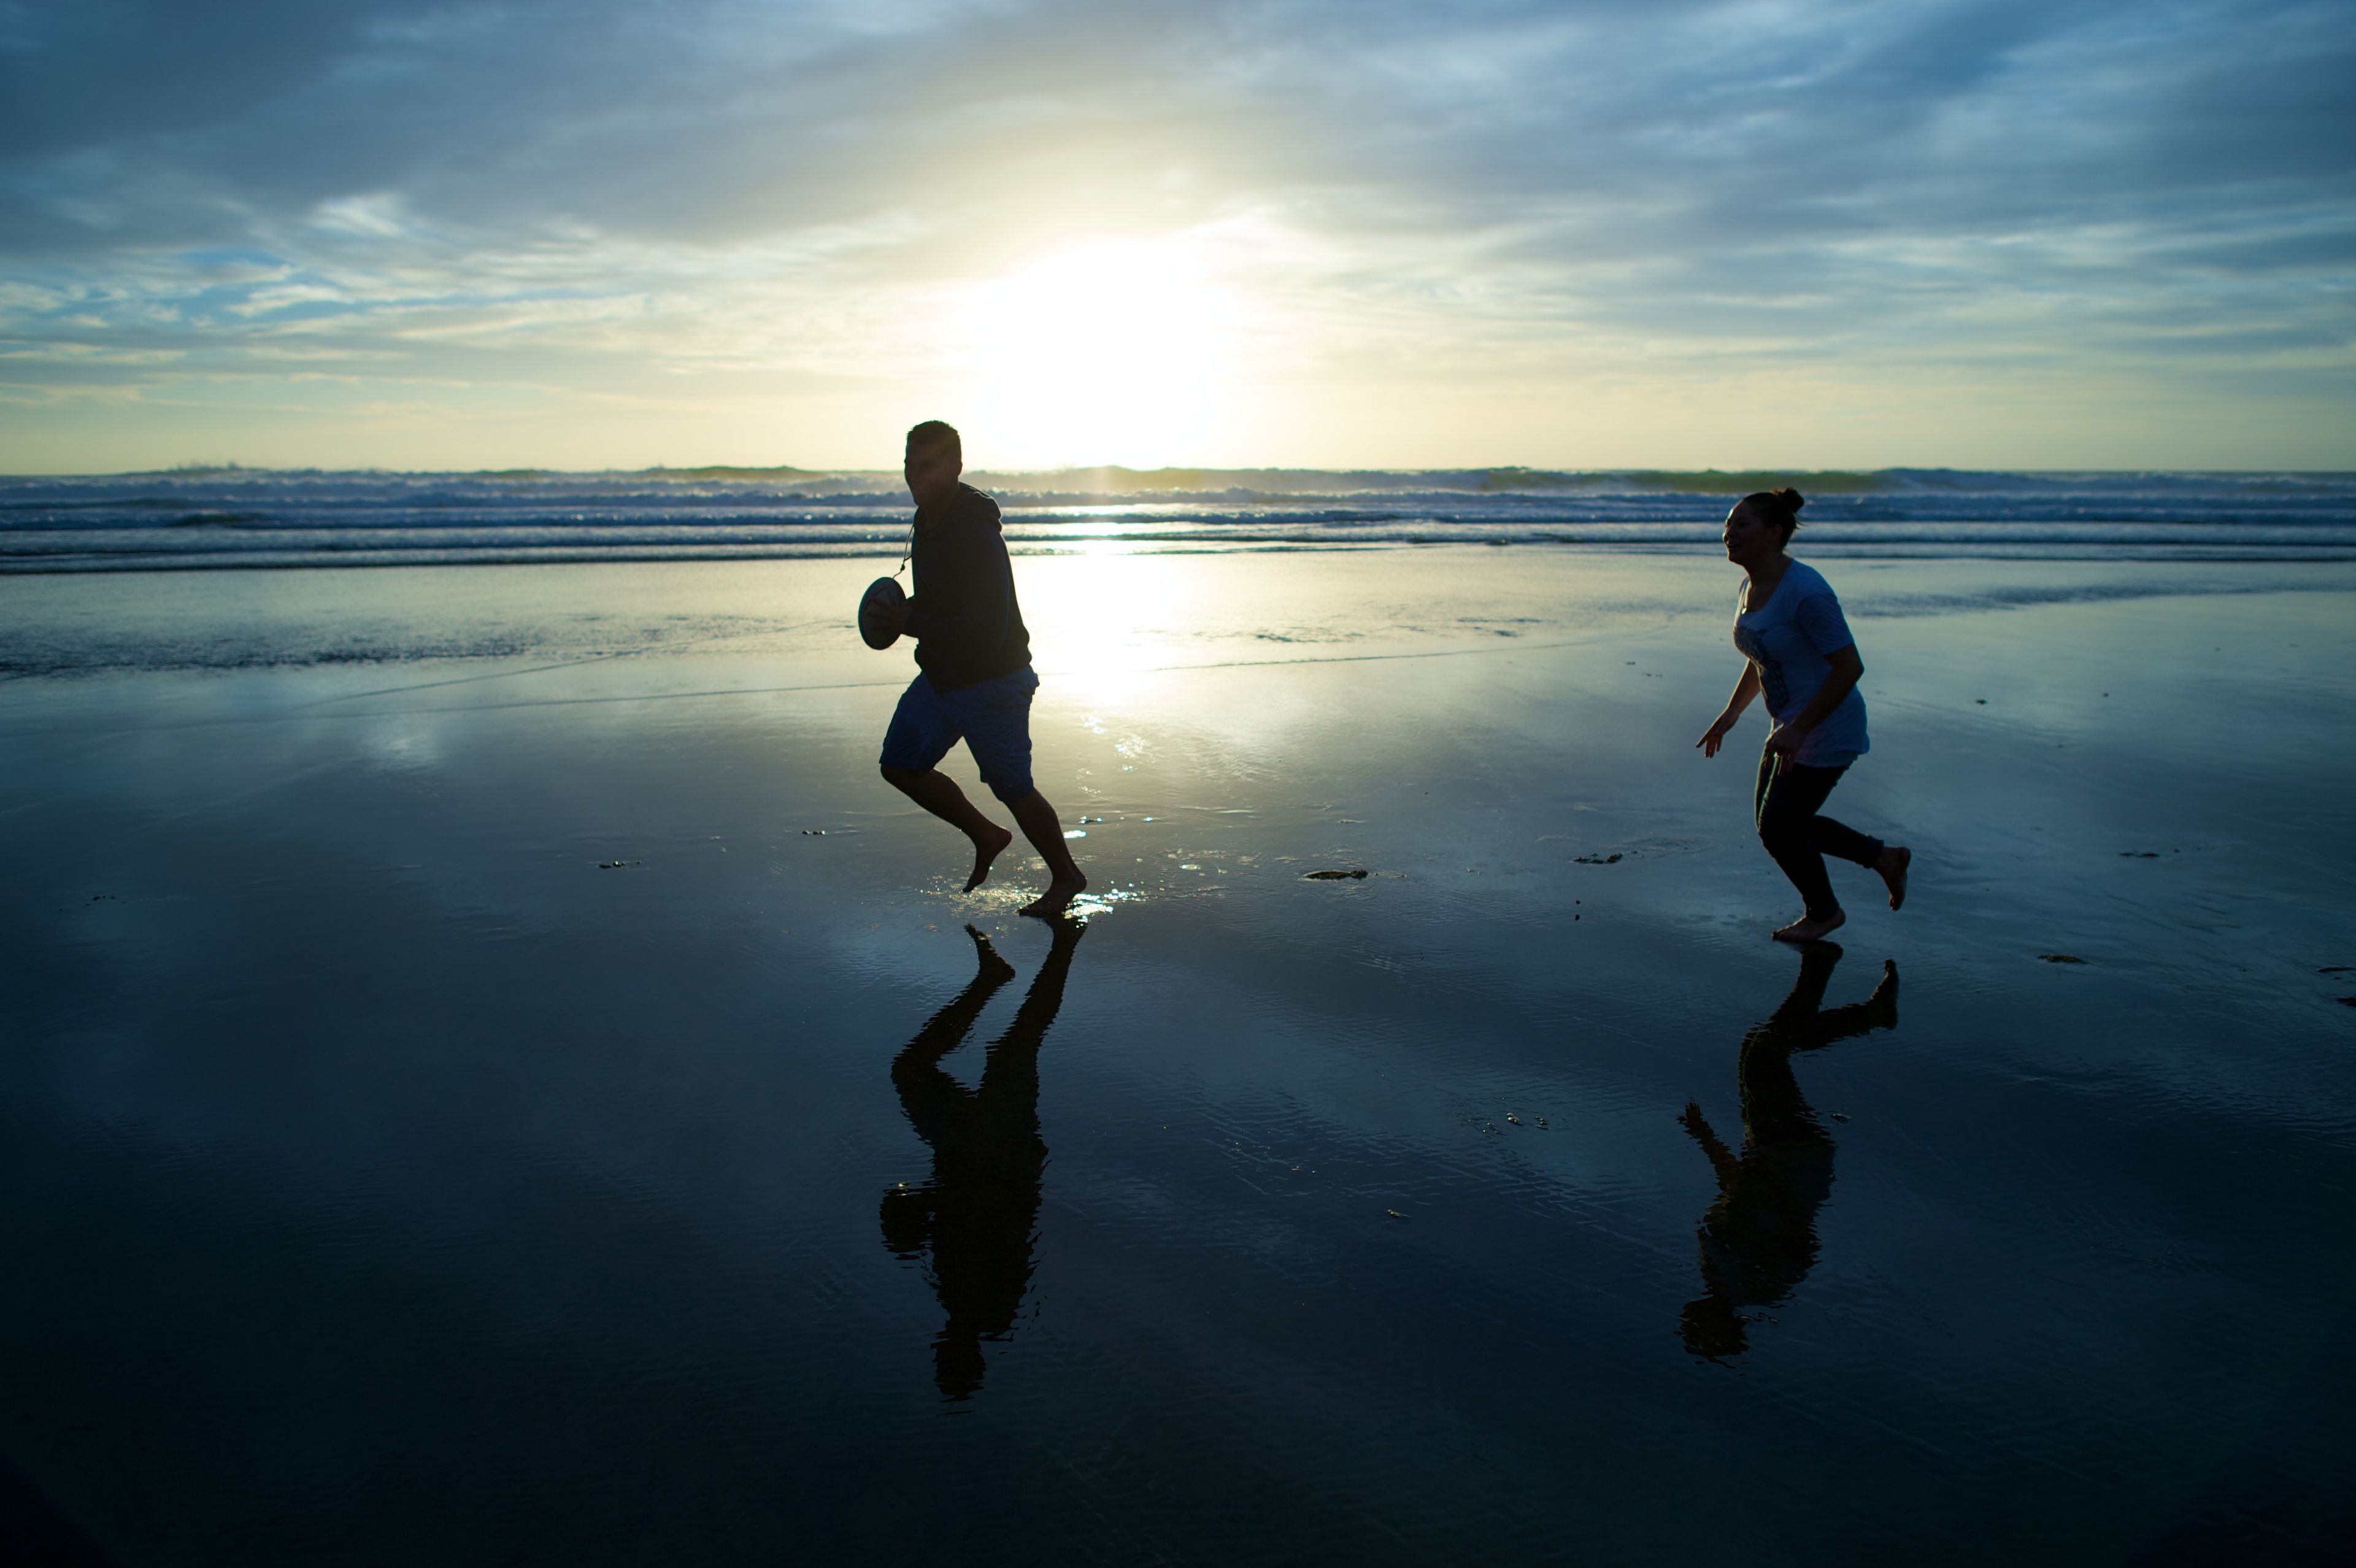 A young man and a young woman play with a football on the beach at sunset.